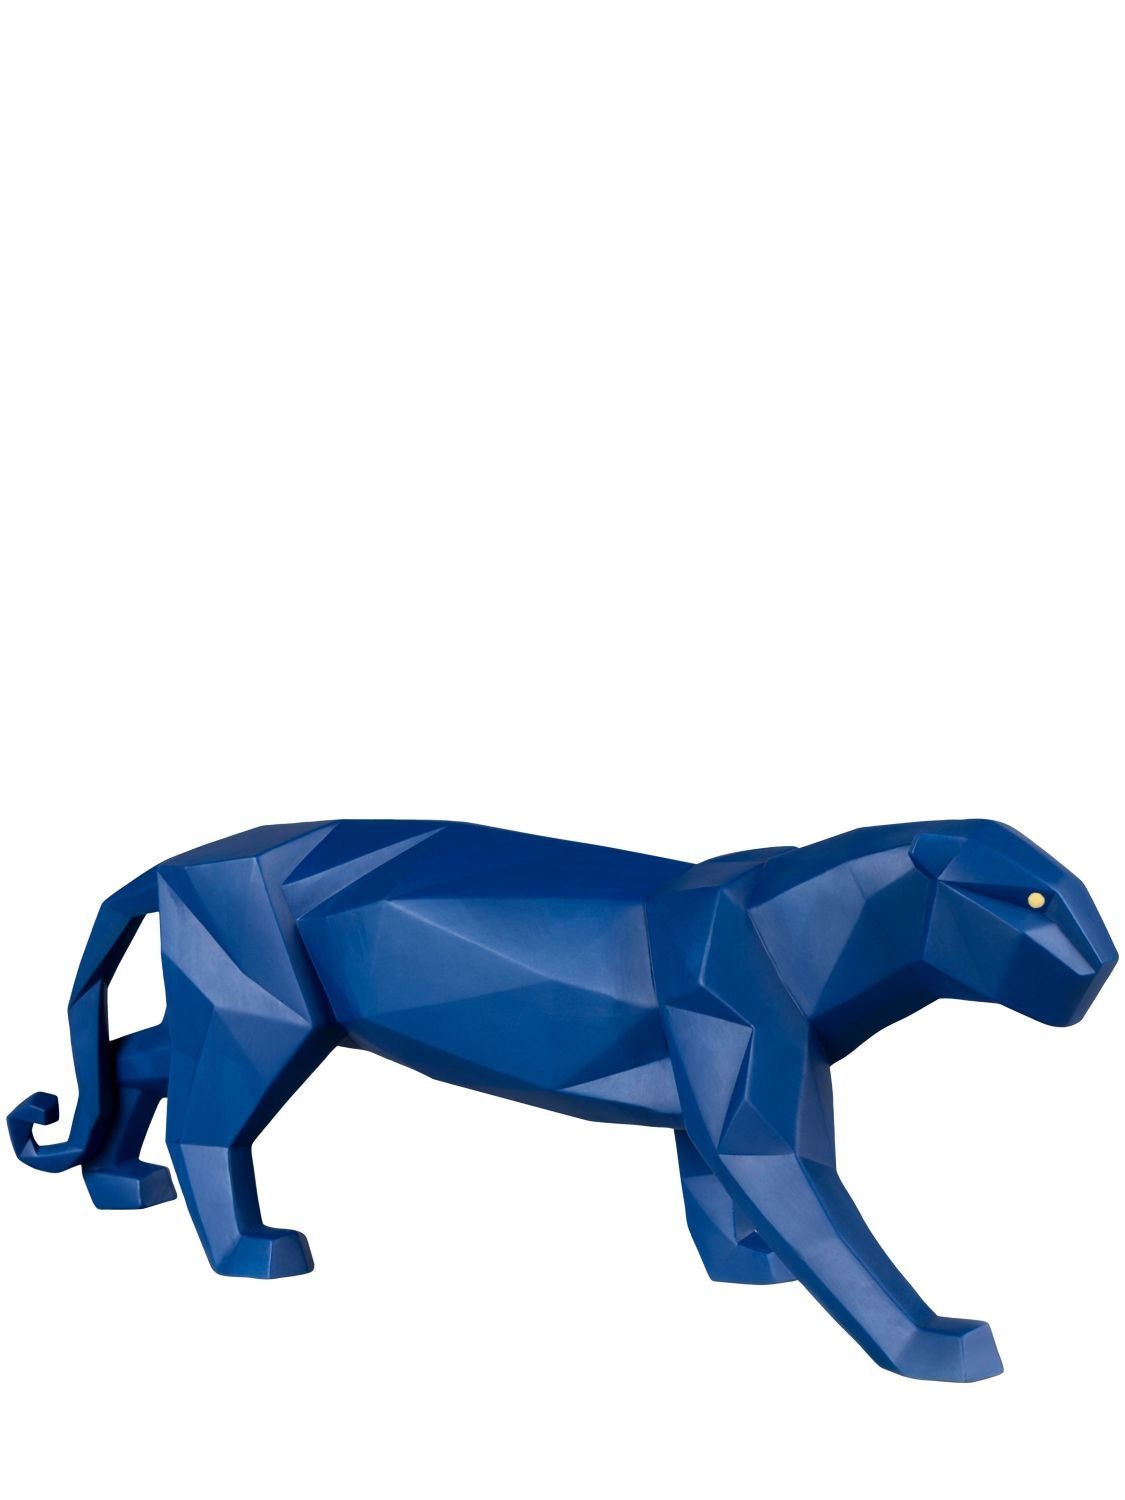 Image of Panther Figurine